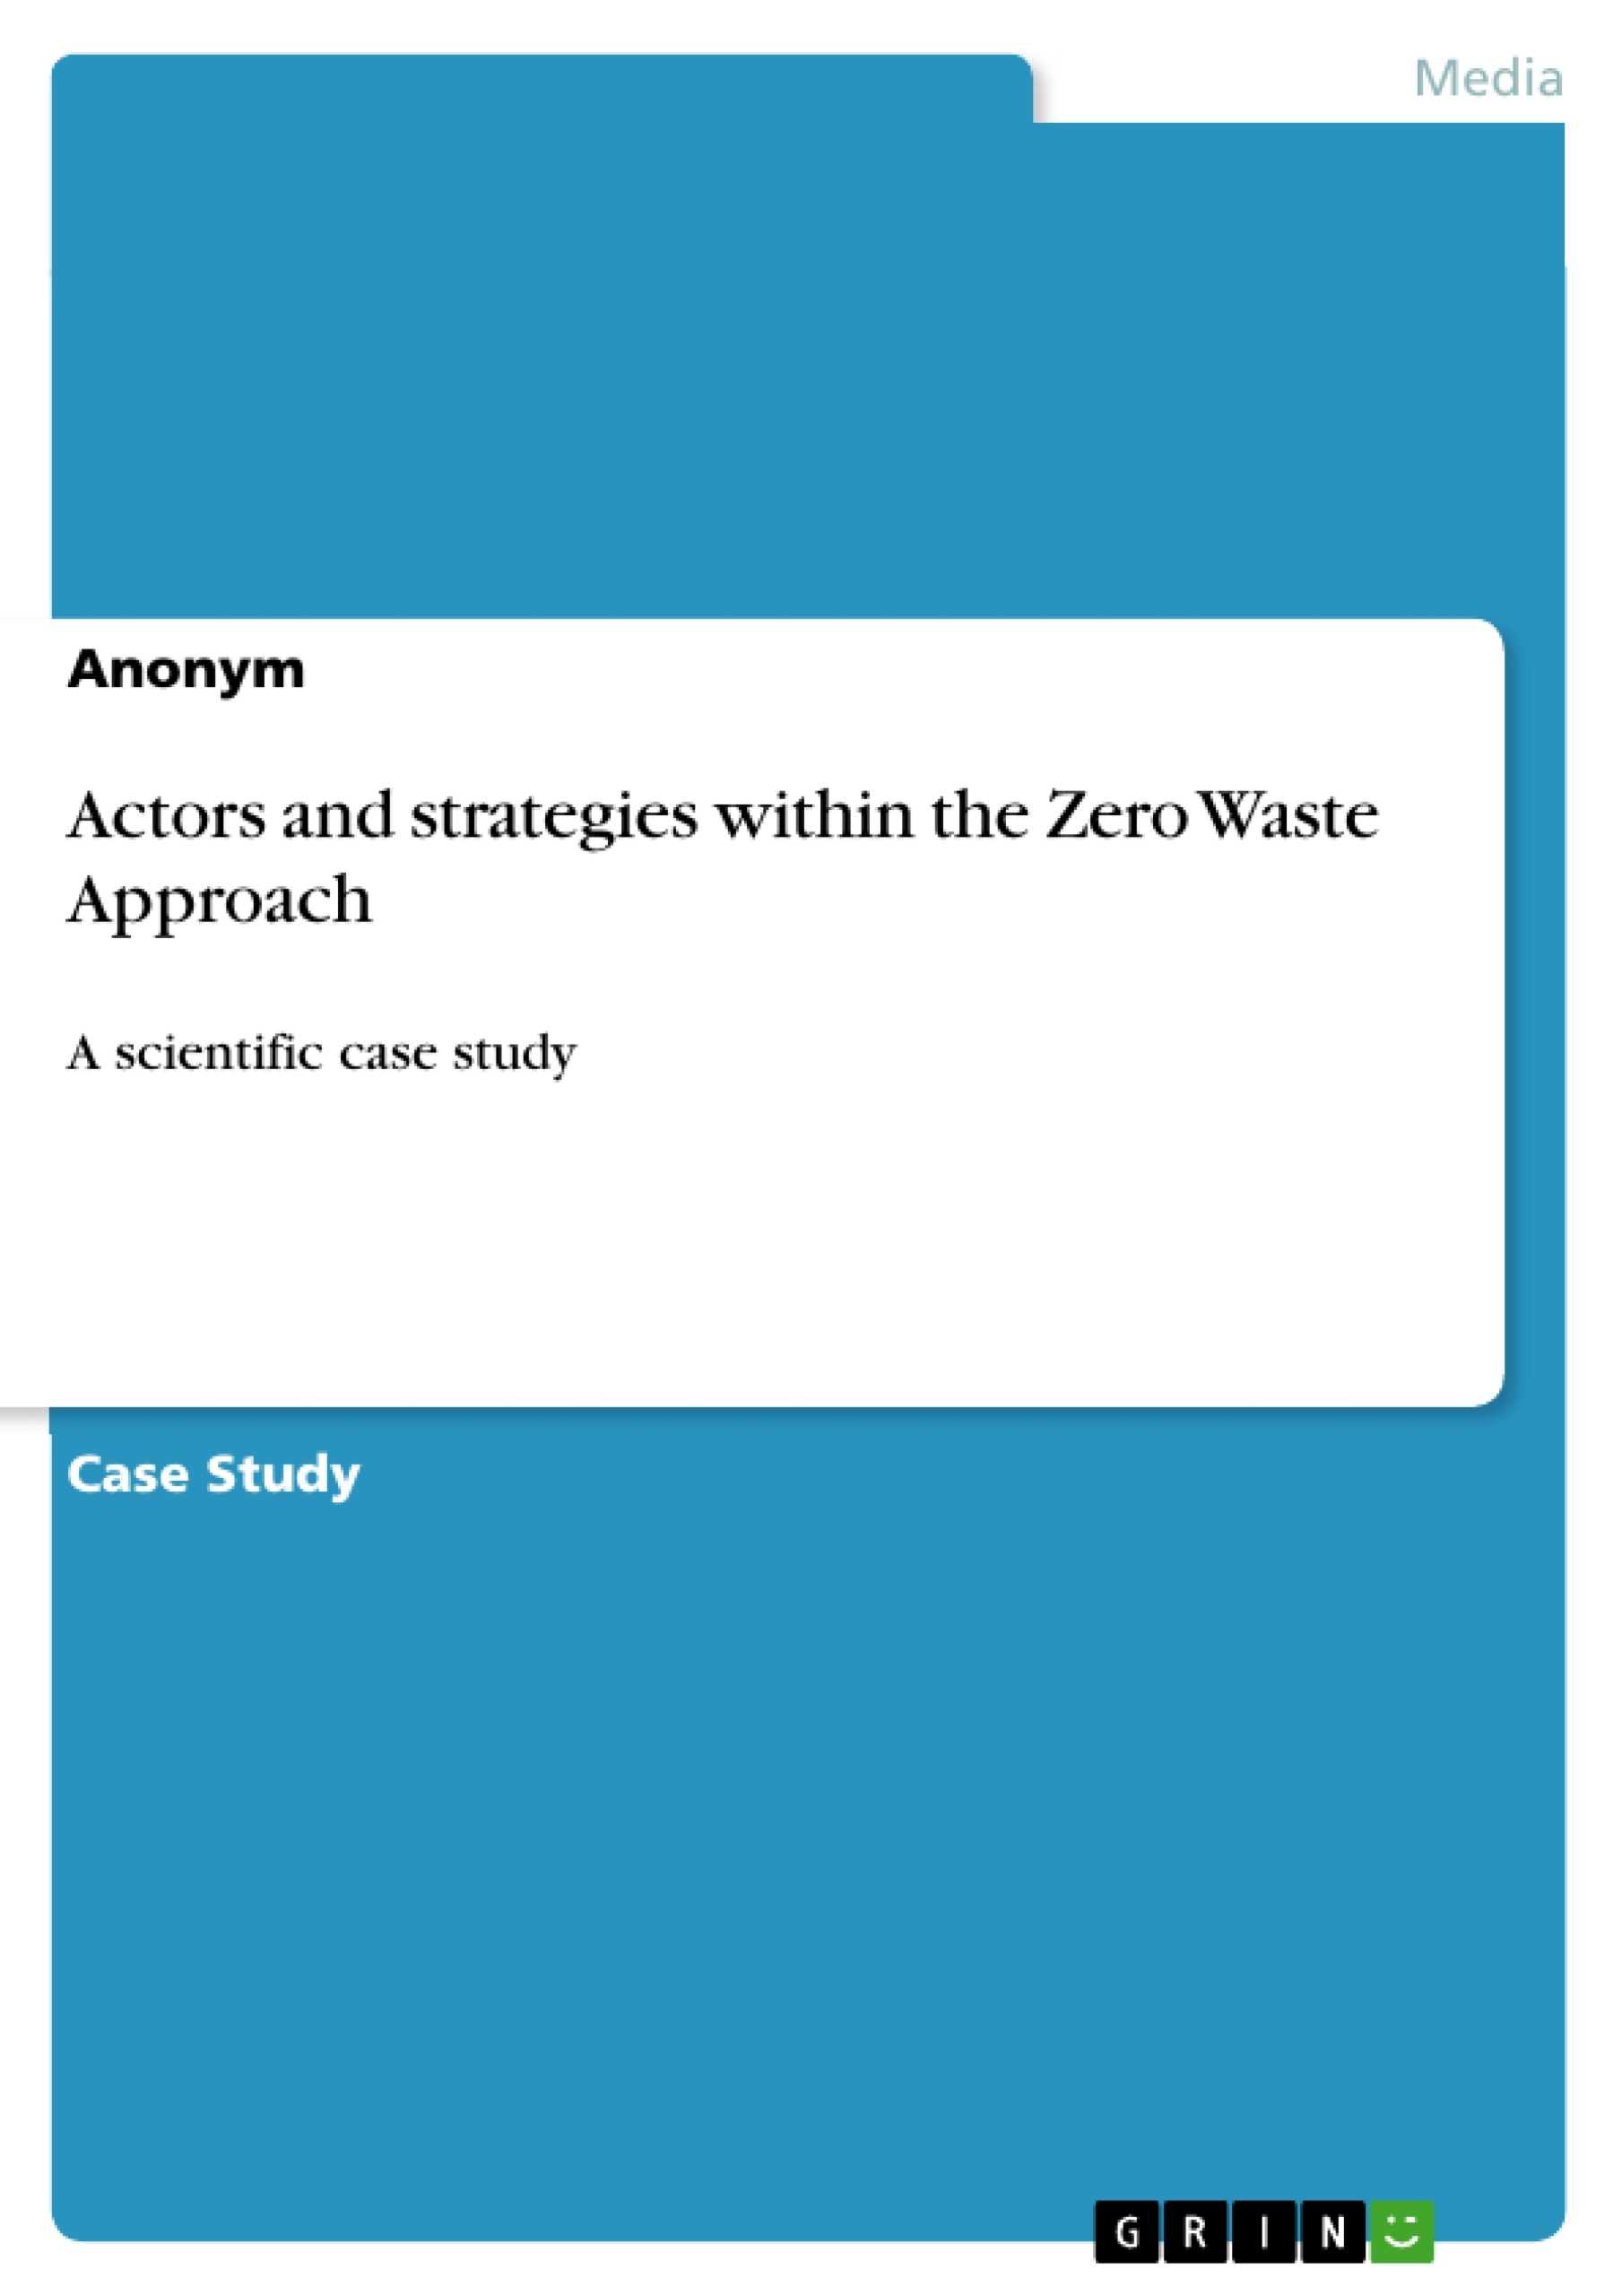 Title: Actors and strategies within the Zero Waste Approach